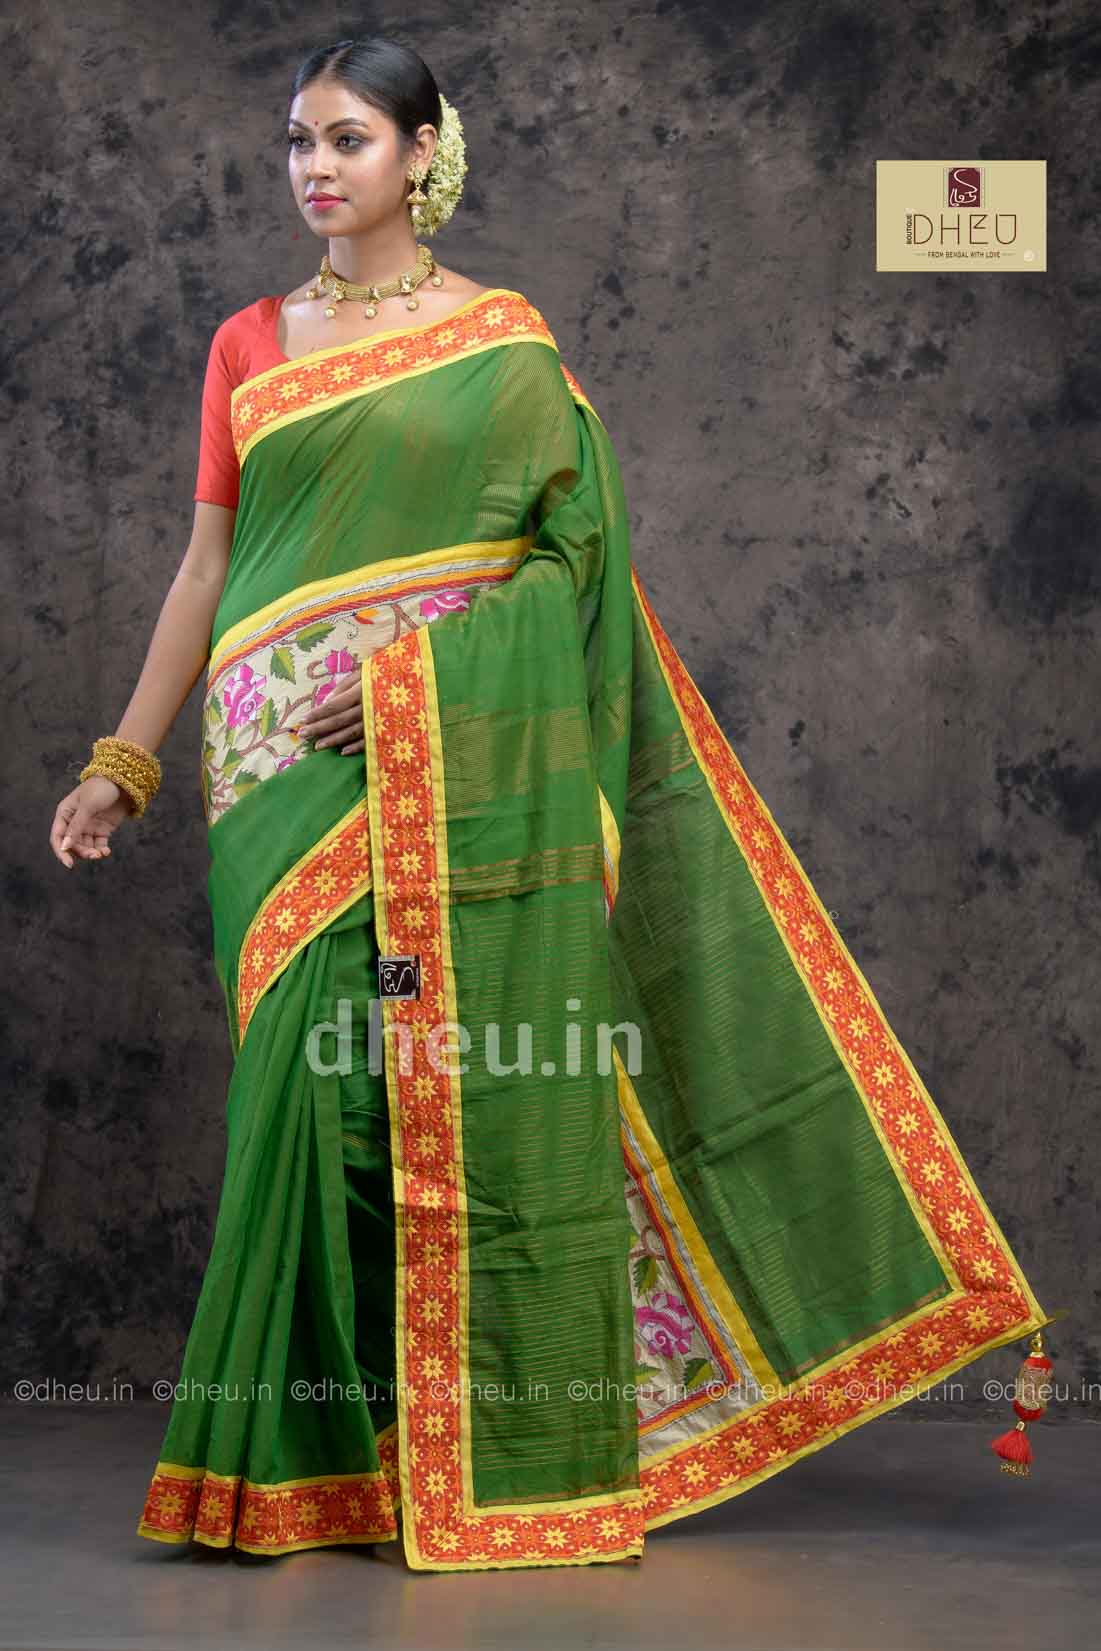 kantha stitch handloom silk saree at lowest price only at dheu.in